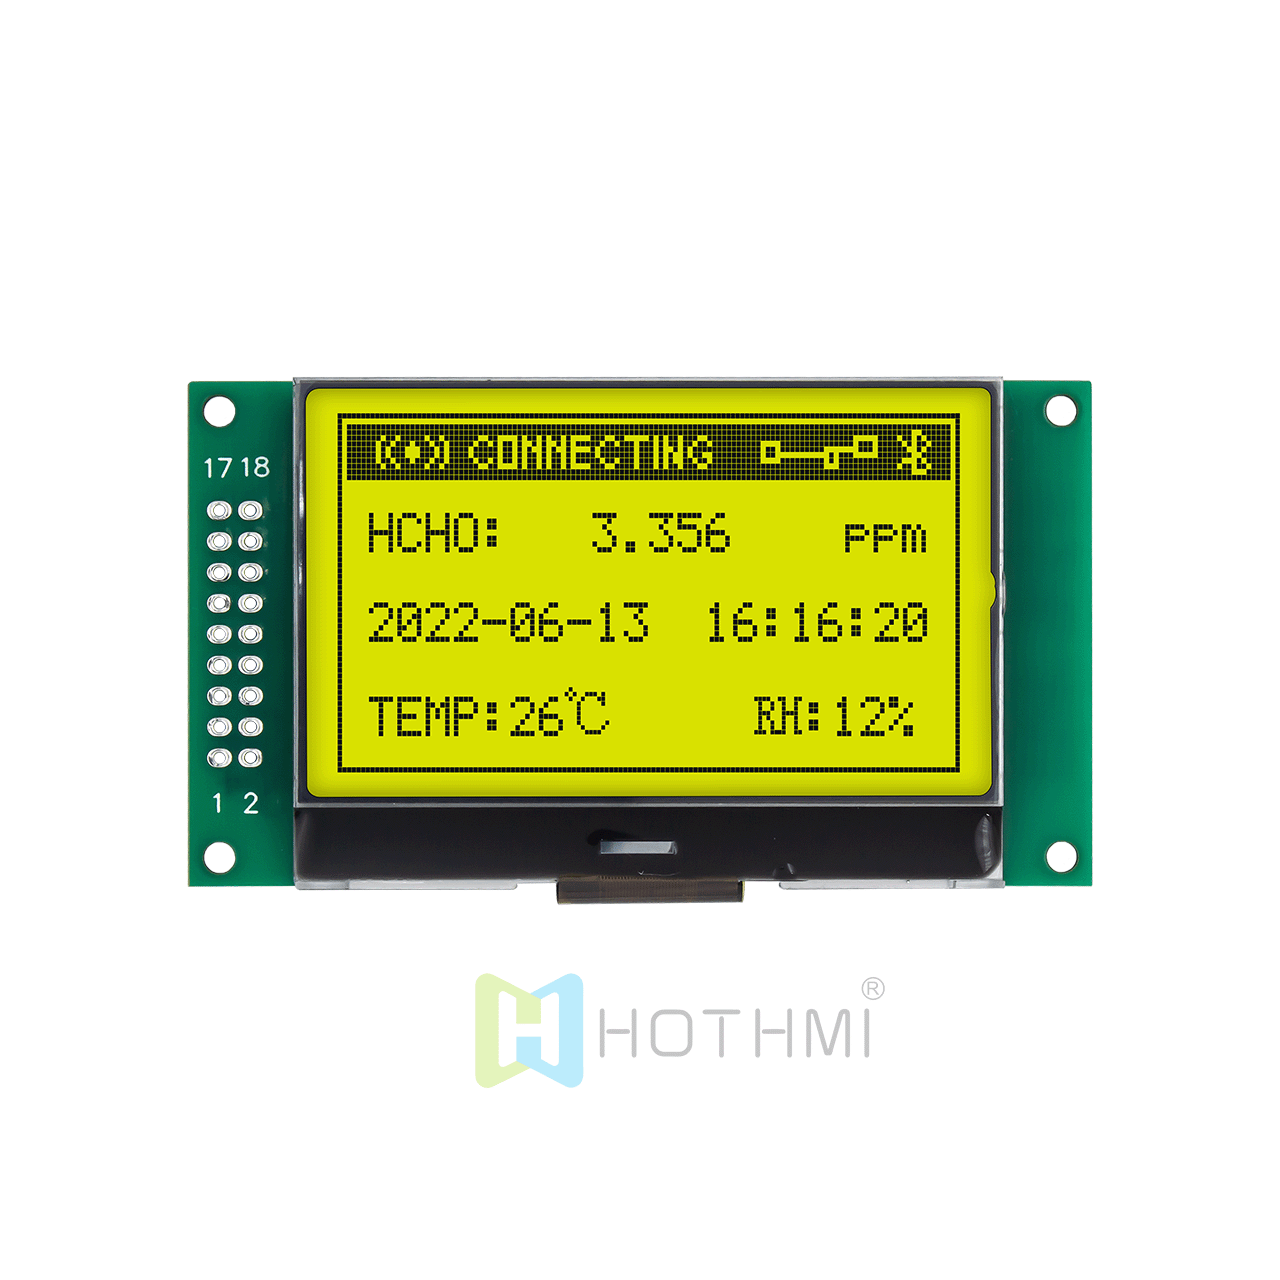 2.4-inch 132x64 LCD graphic module/13264 graphic module/ST7565R/parallel port/can be used with Arduino/Raspberry Pi